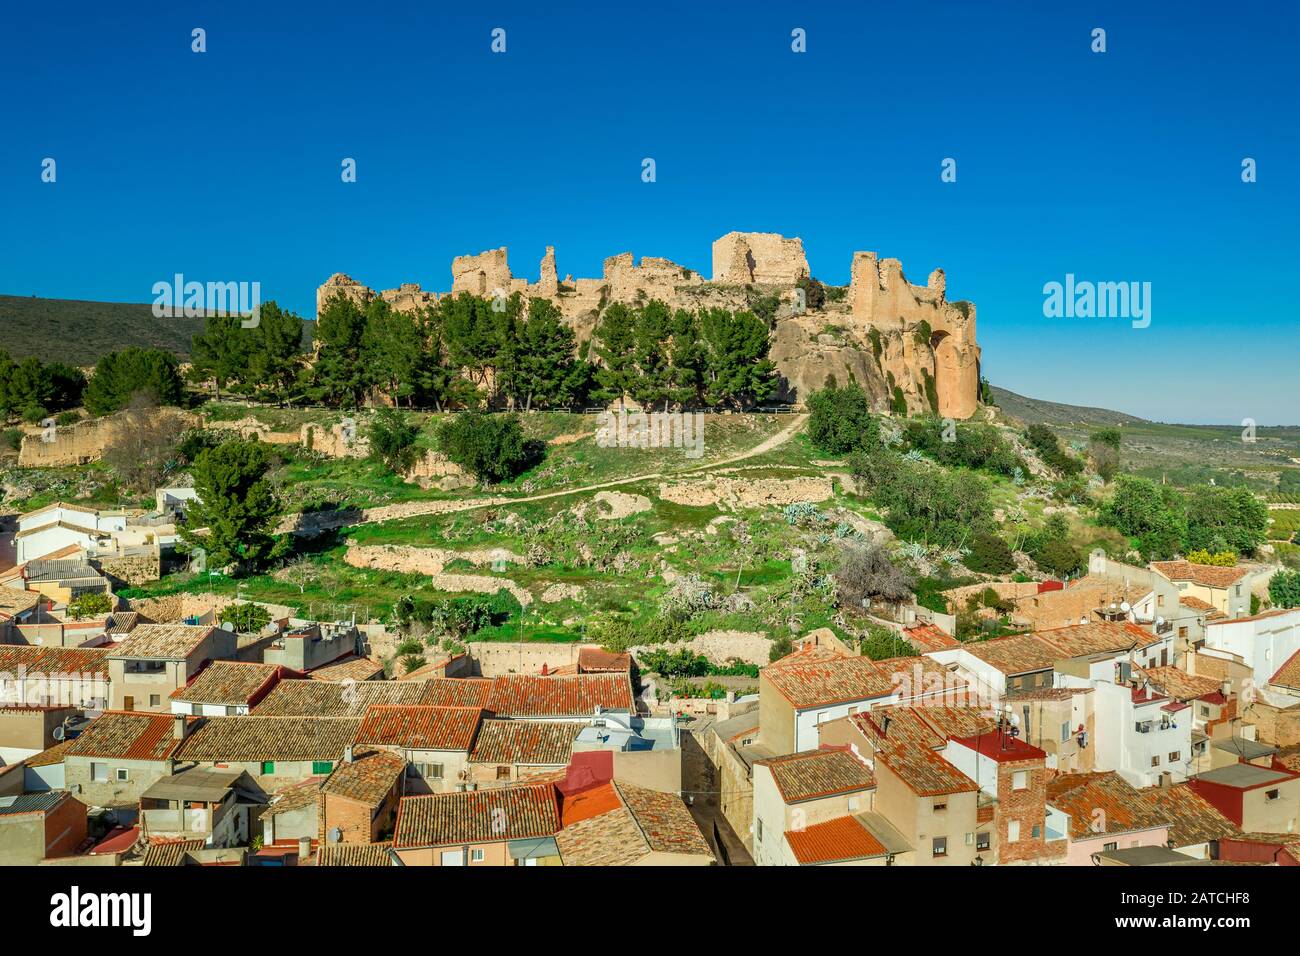 Aerial view of medieval ruined Montesa castle center of the Templar and Montesa order knights with donjon, long ramp to the castle gate in Spain Stock Photo